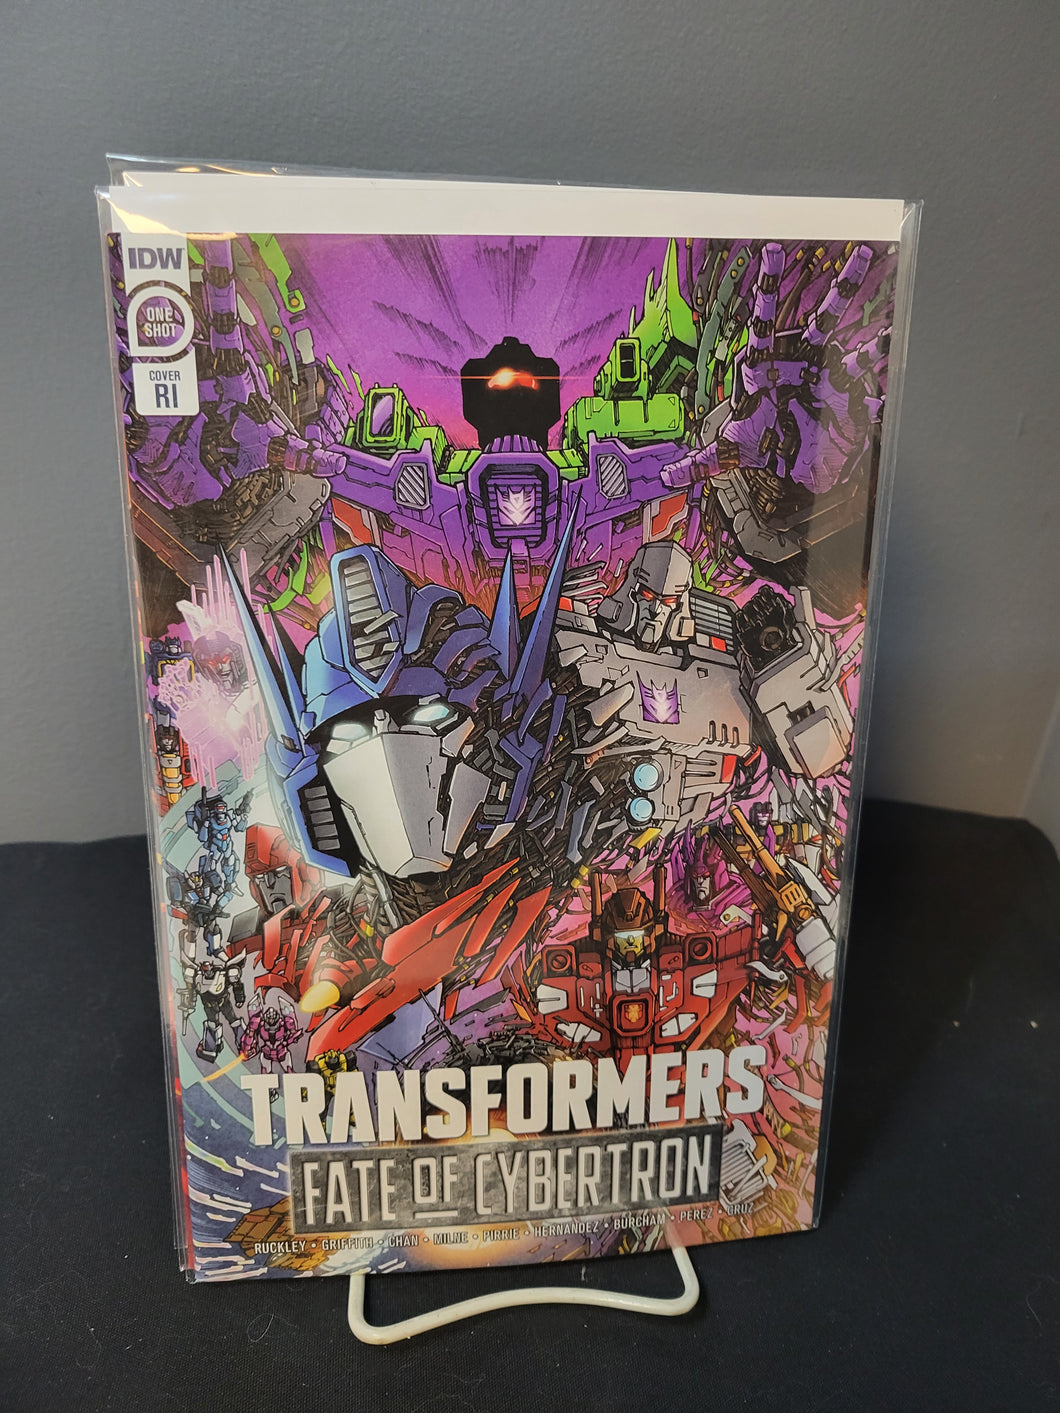 Transformers Fate Of Cybertron 1:10 Ratio Variant